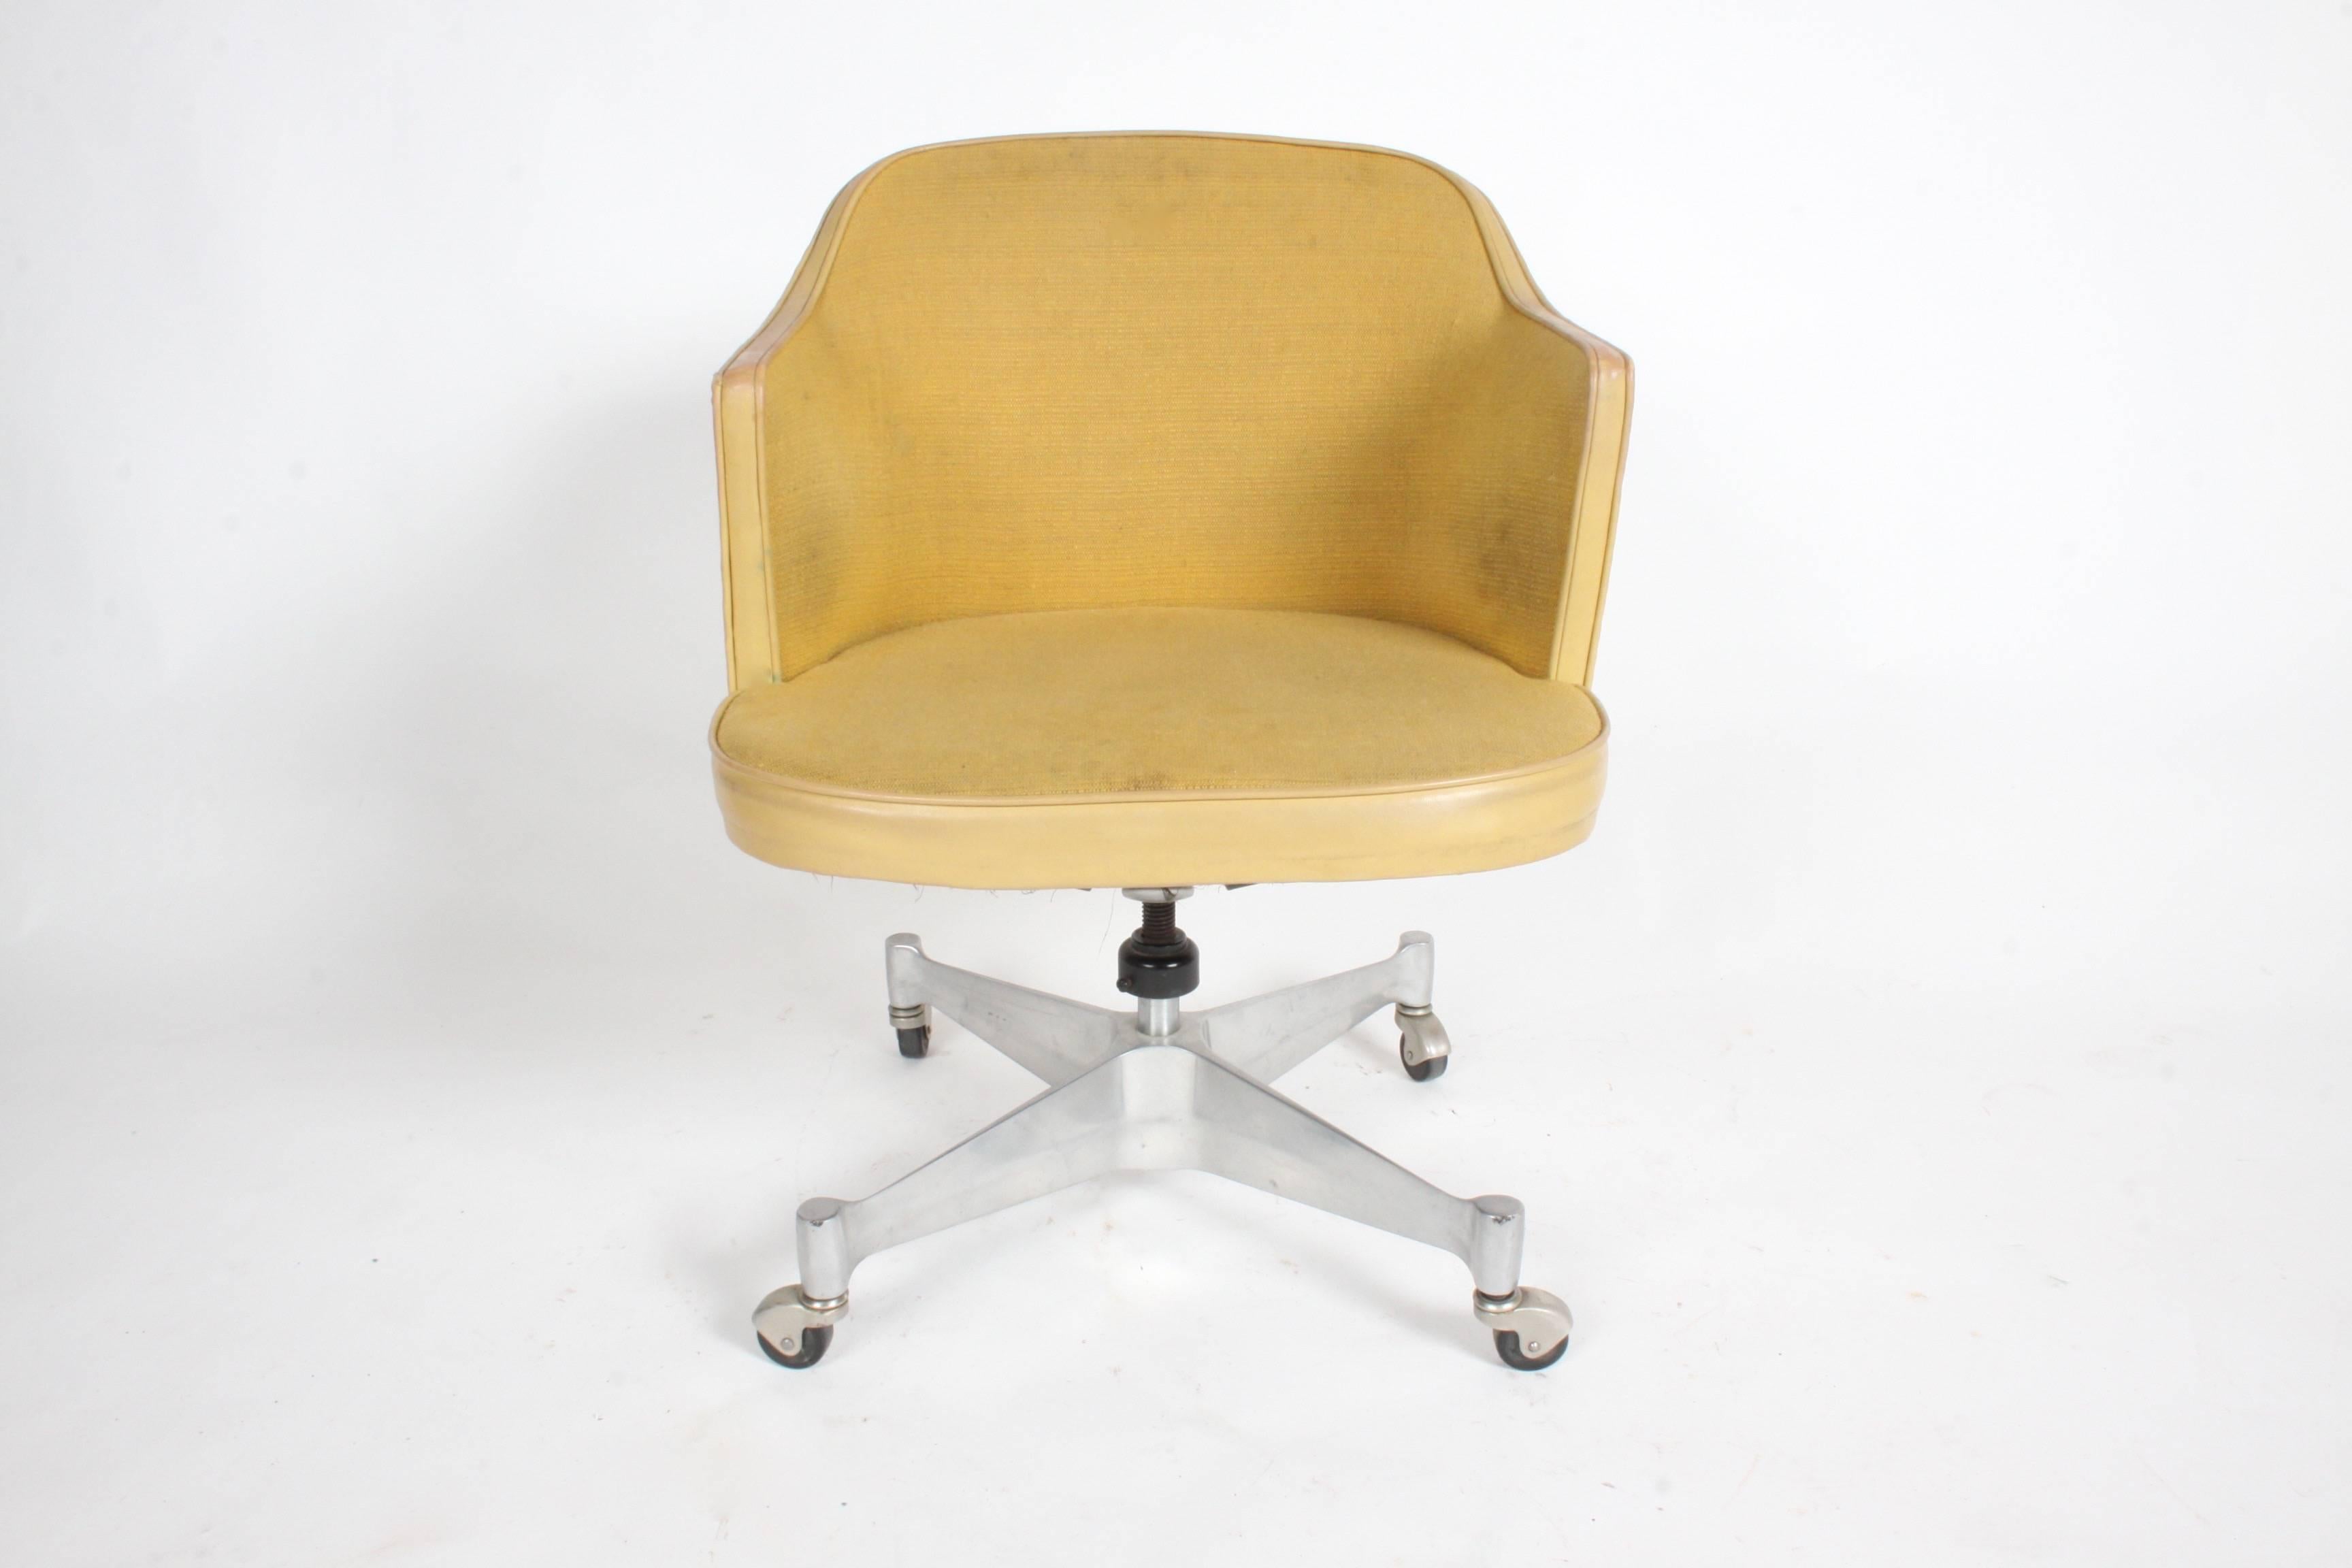 George Nelson for Herman Miller low desk chair on castors with swivel, tilt and adjusts in height. Sold with original upholstery that shows its age, some photos have been edited, mainly the back. Upholstery and foam need replacement. Original label,